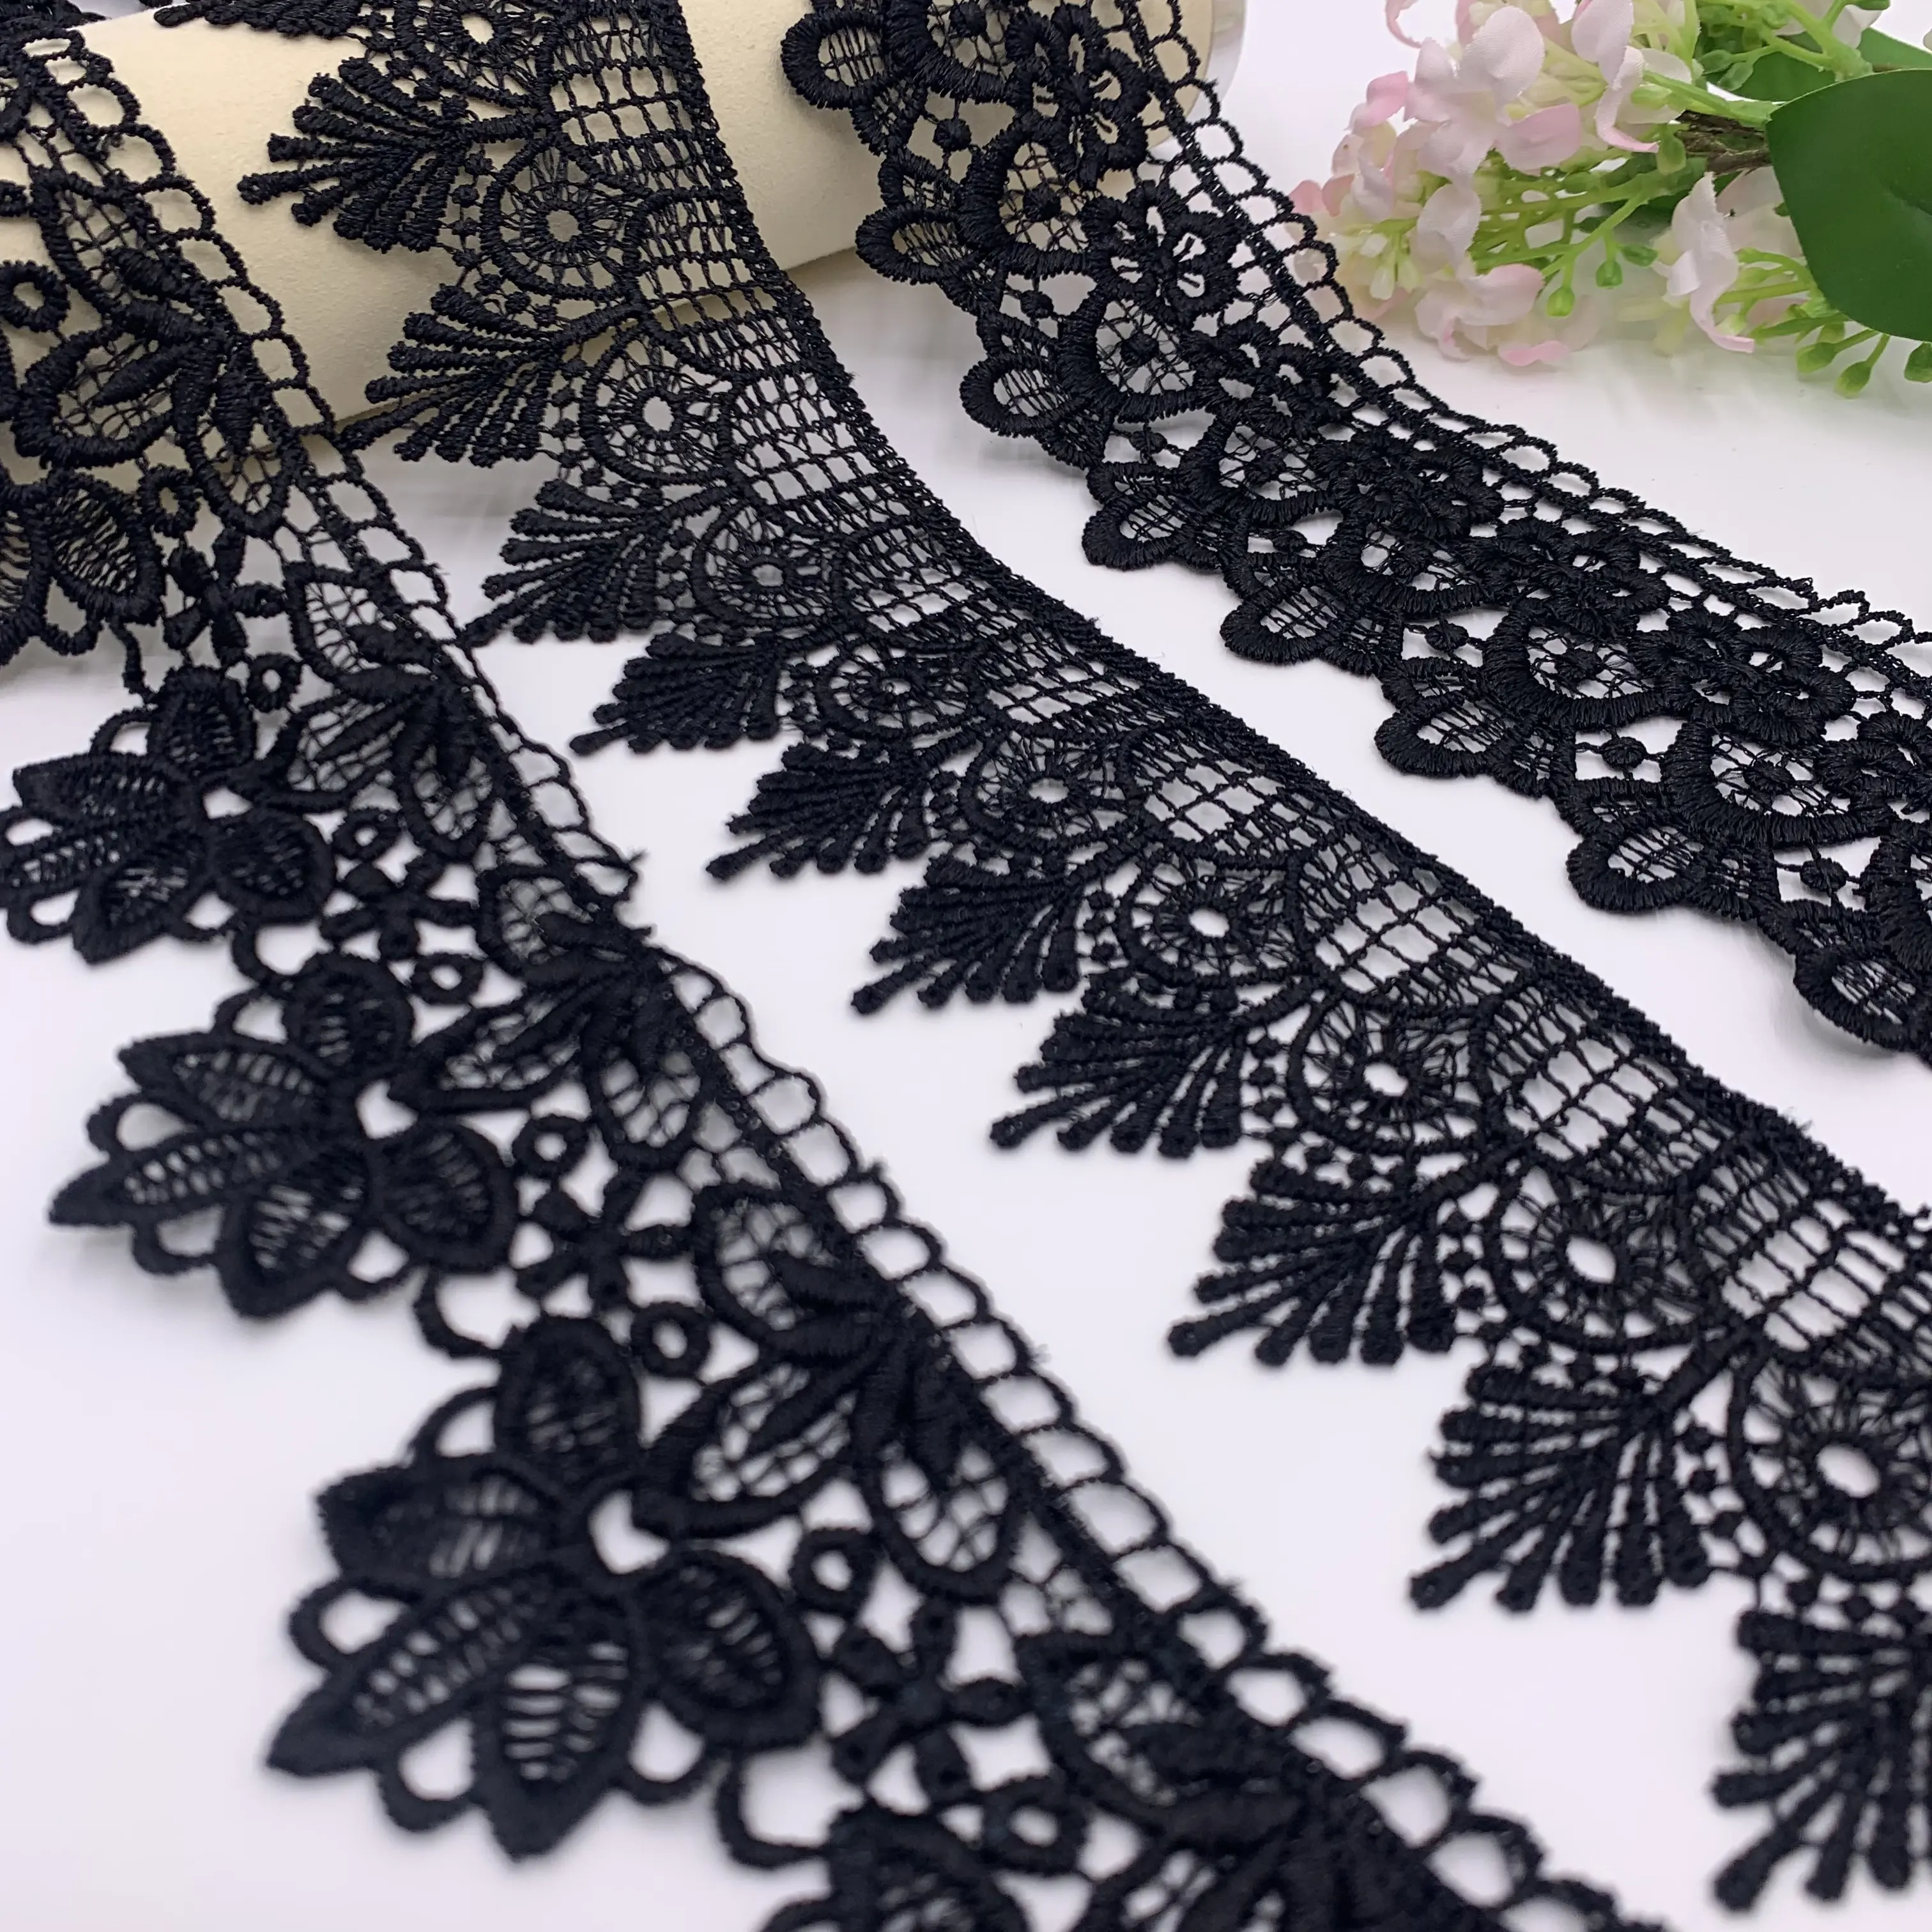 Wholesale Water Soluble Dress Material Black Polyester Embroidery Lace Fabric Trim For Clothing Wedding